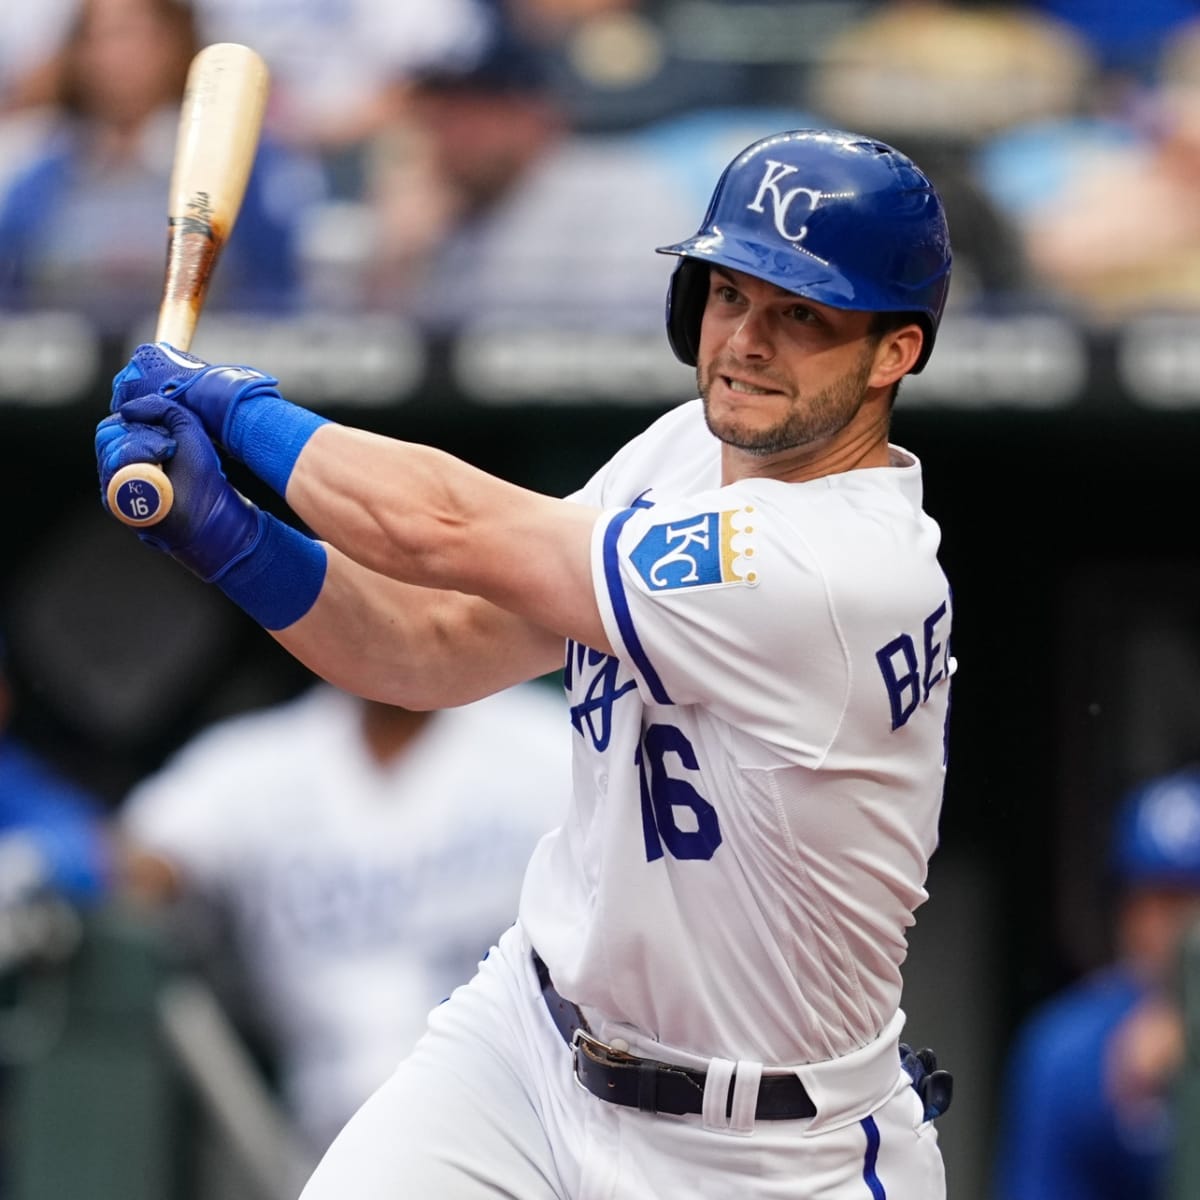 Andrew Benintendi's return to simple approach with KC Royals